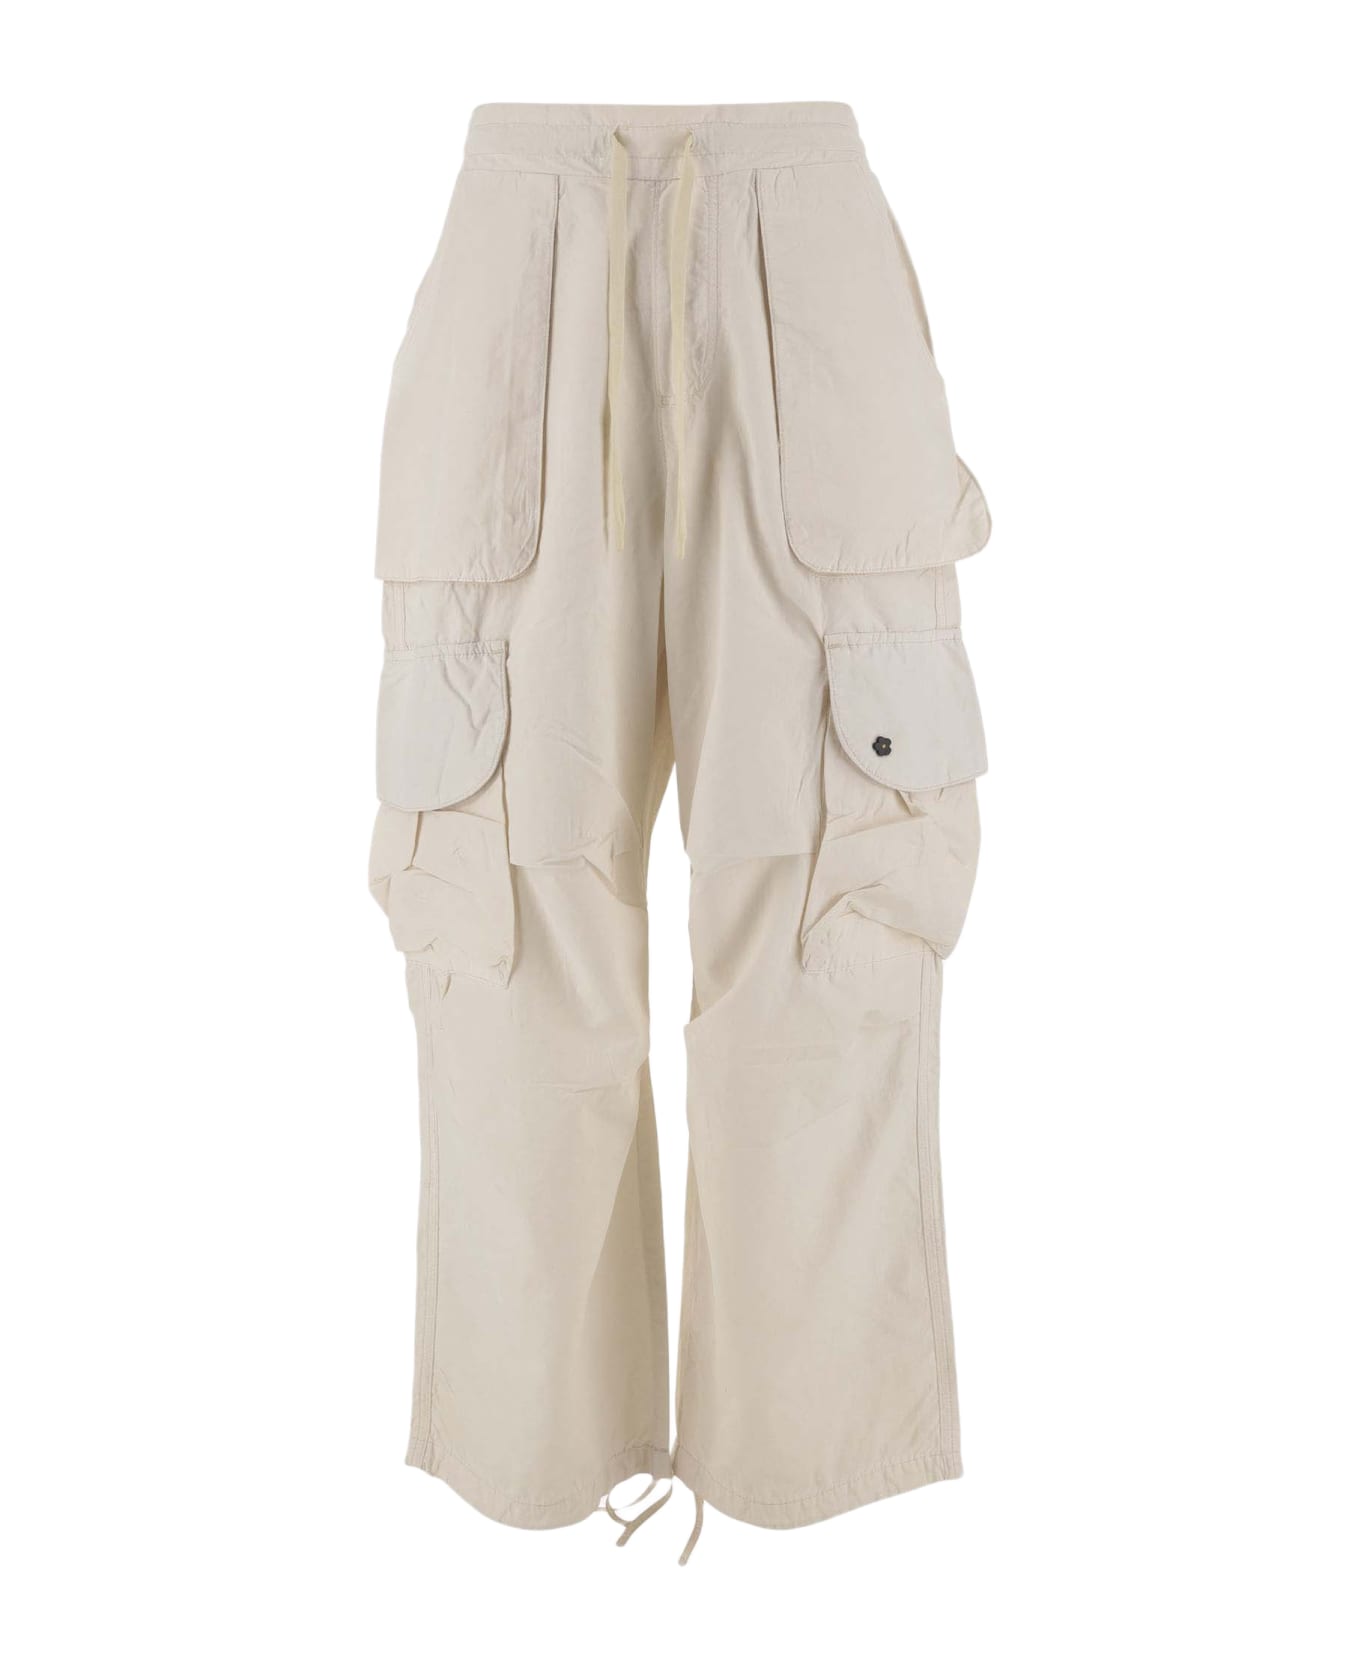 A Paper Kid Cotton Blend Cargo Pants - Beige ボトムス